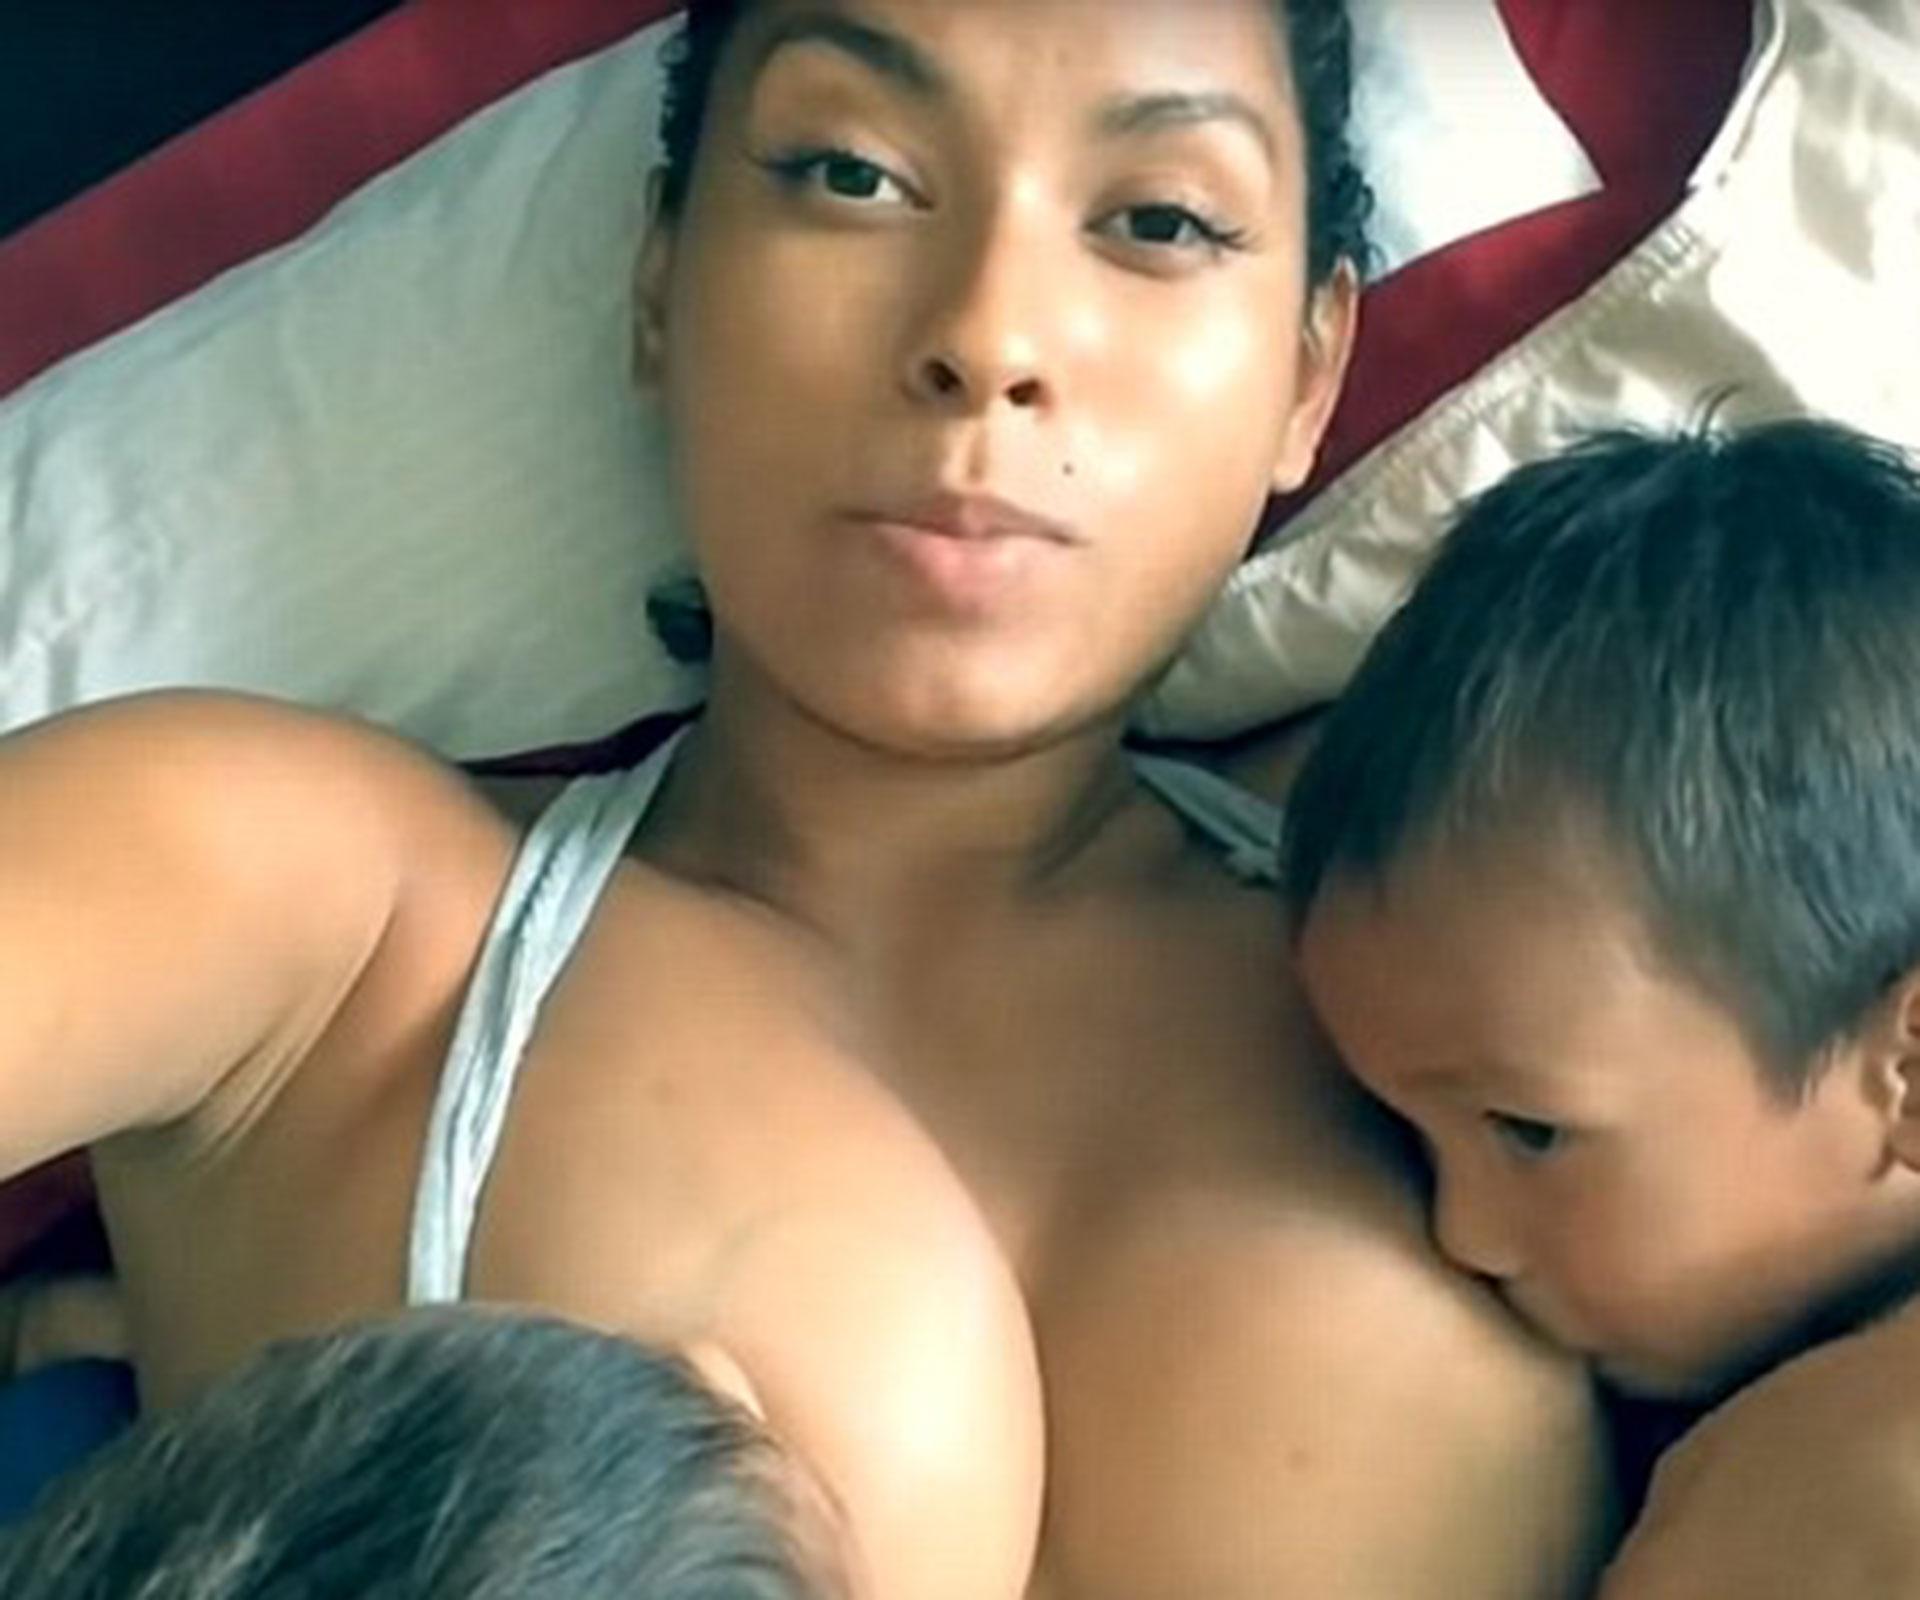 Woman’s breastfeeding videos spark debate about correct age to stop breastfeeding